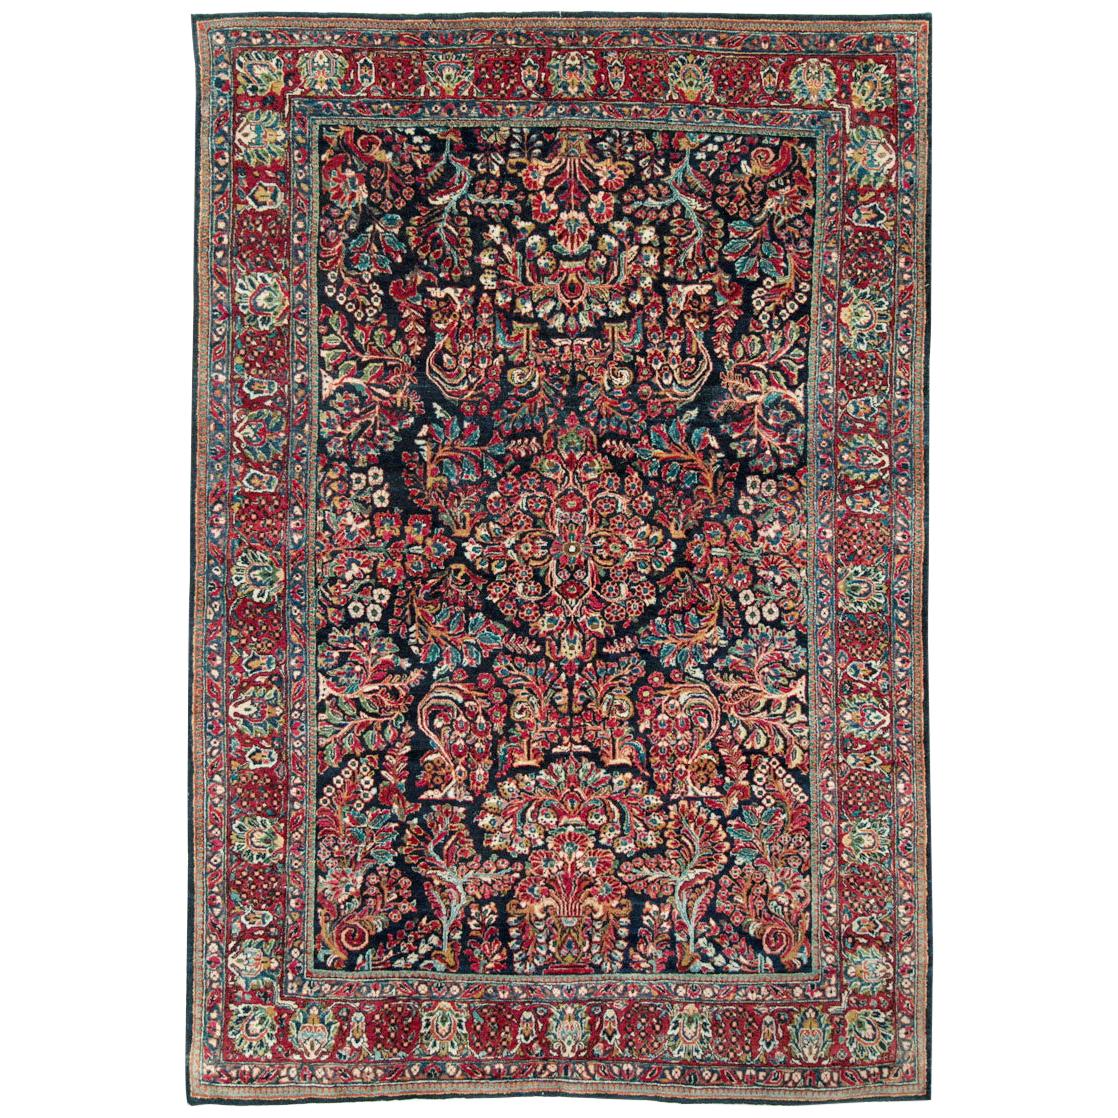 Early 20th Century Persian "American" Style Floral Sarouk Accent Rug